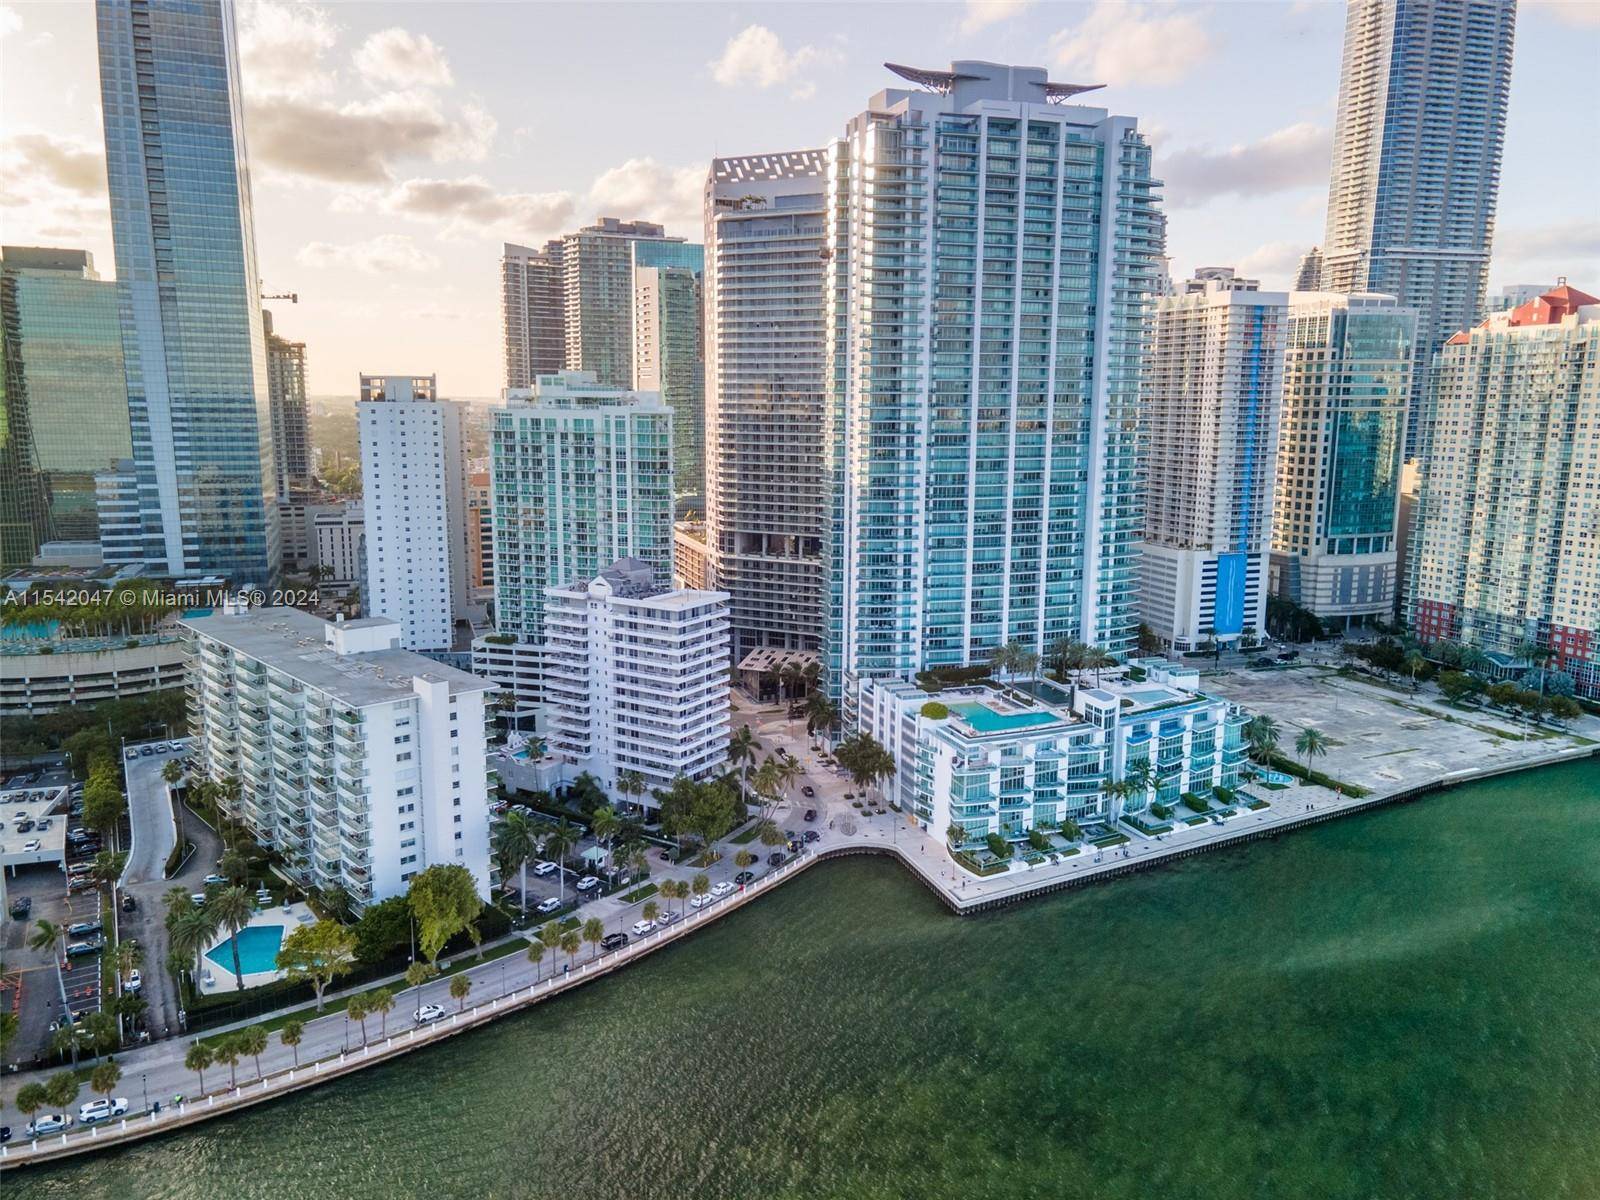 Just Reduced ! Spacious 2bed 2bath Unfurnished Sail Condo unit 2204 available FOR RENT in the vibrant Brickell Miami area.